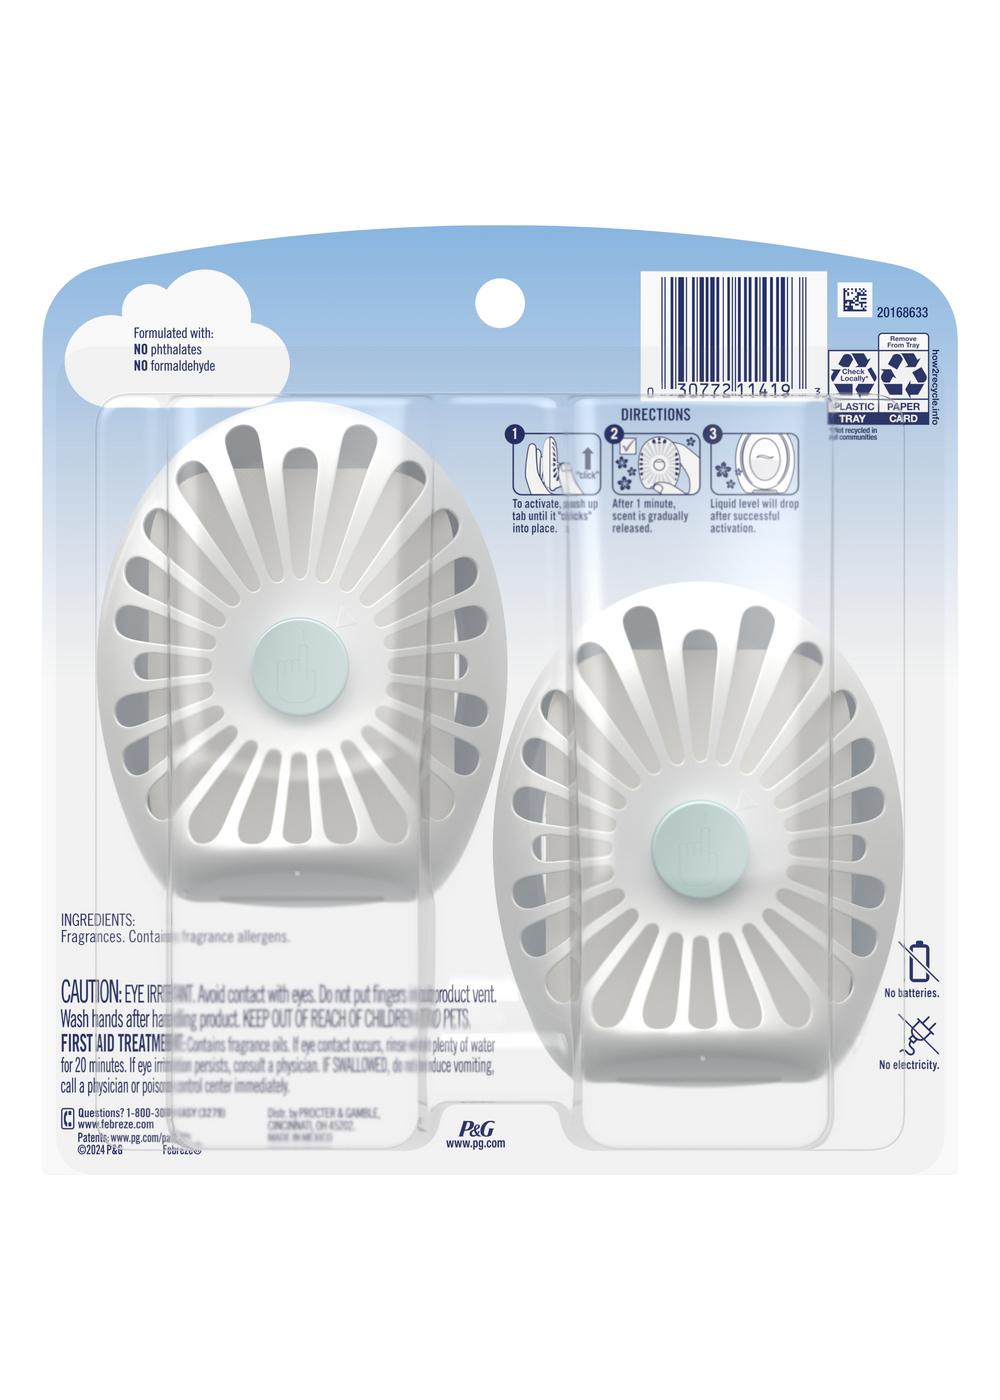 Febreze Small Spaces Air Freshener - Refresh & Energize; image 2 of 2